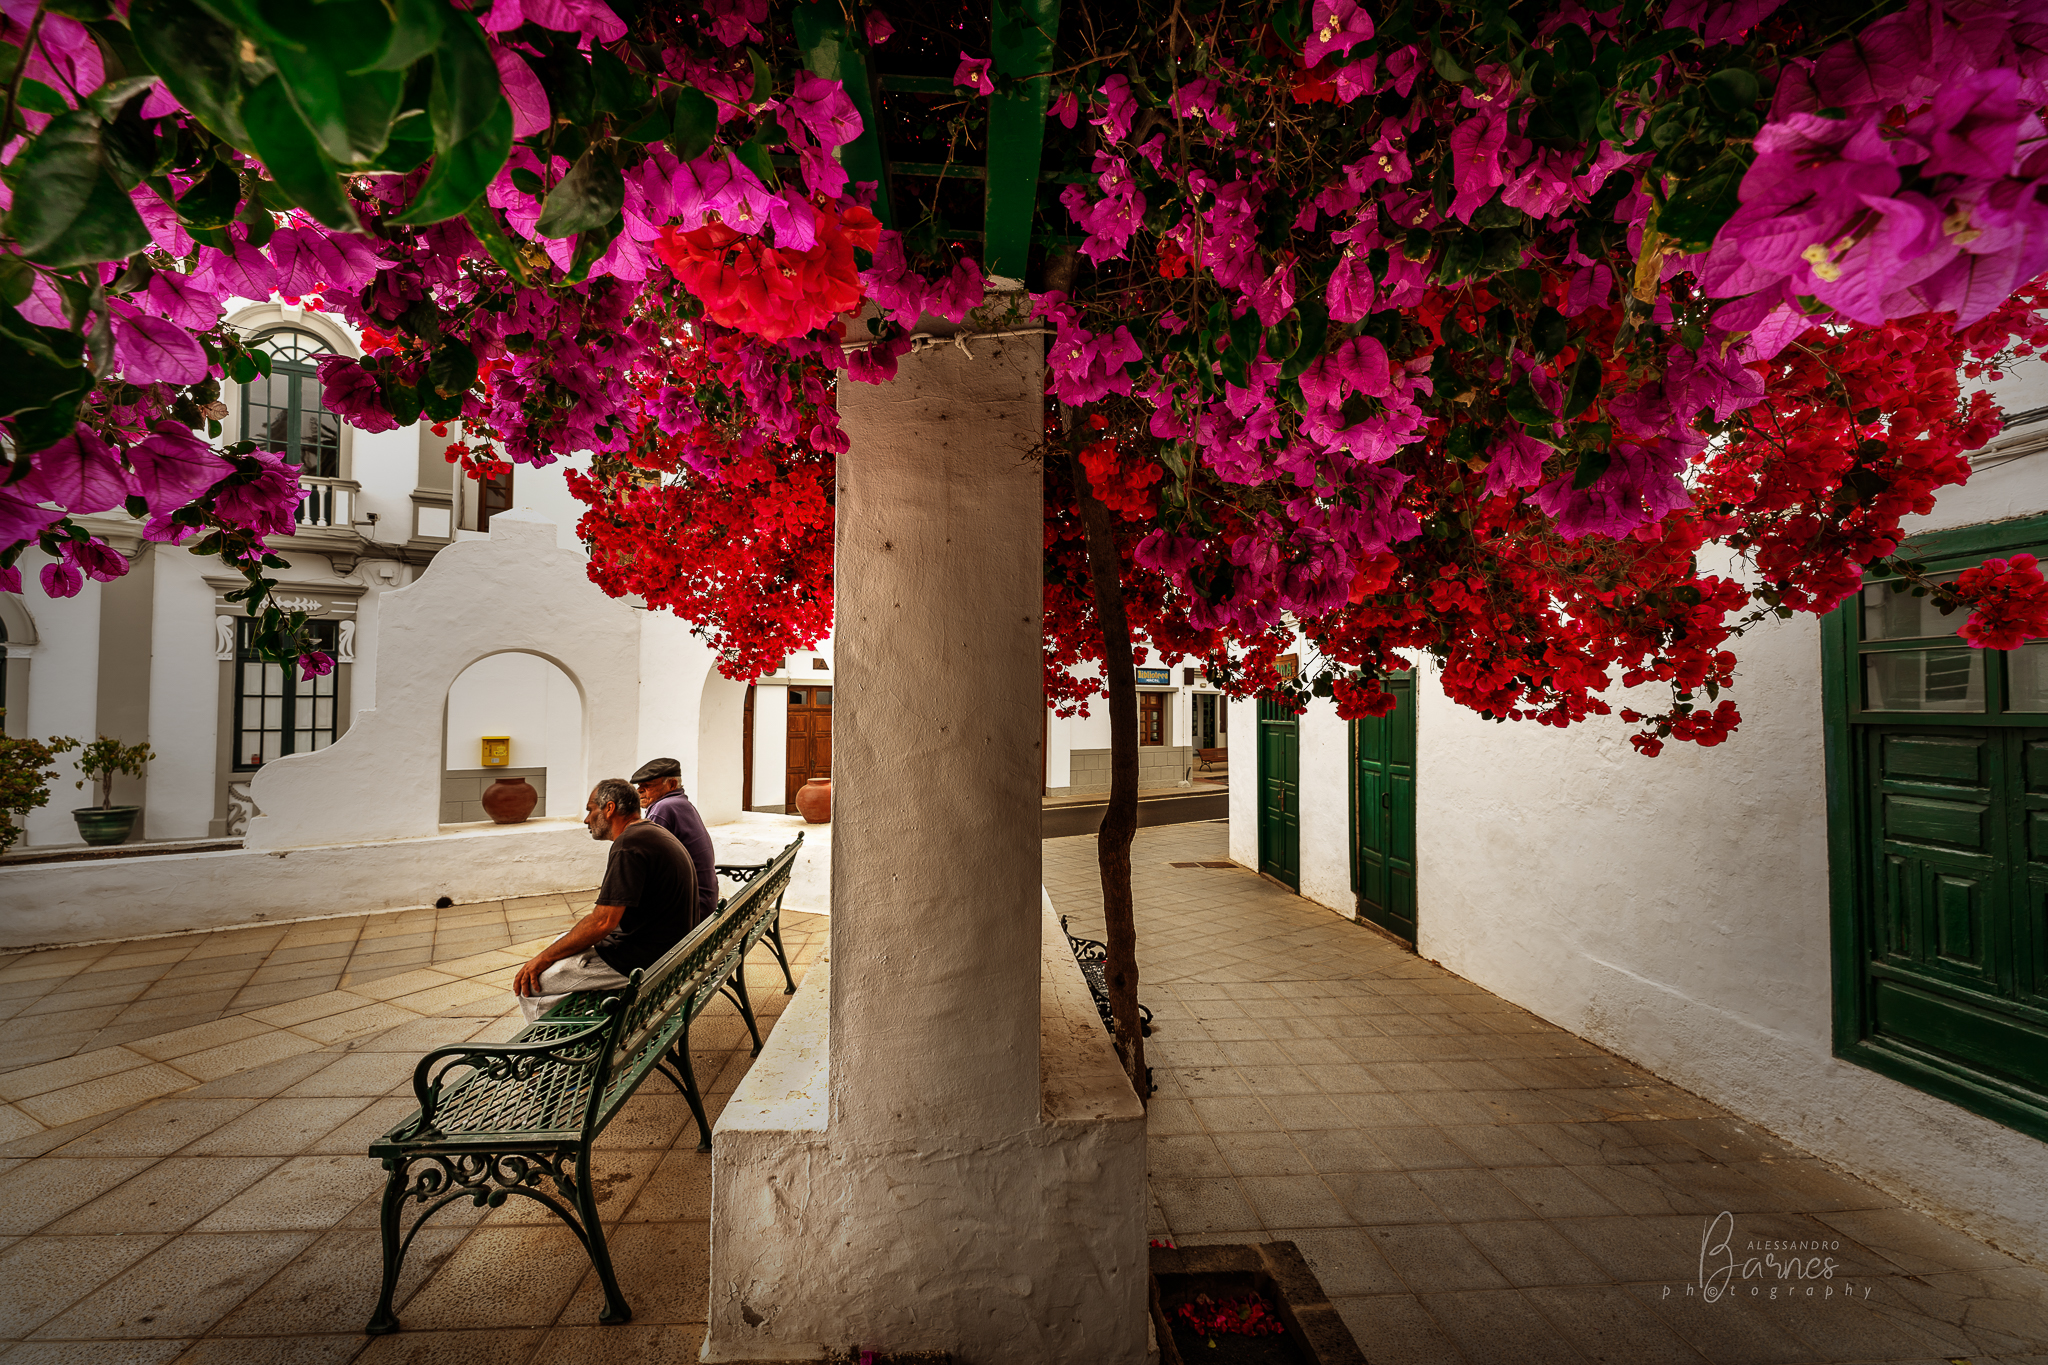 Under the shade of bougainvillea ...